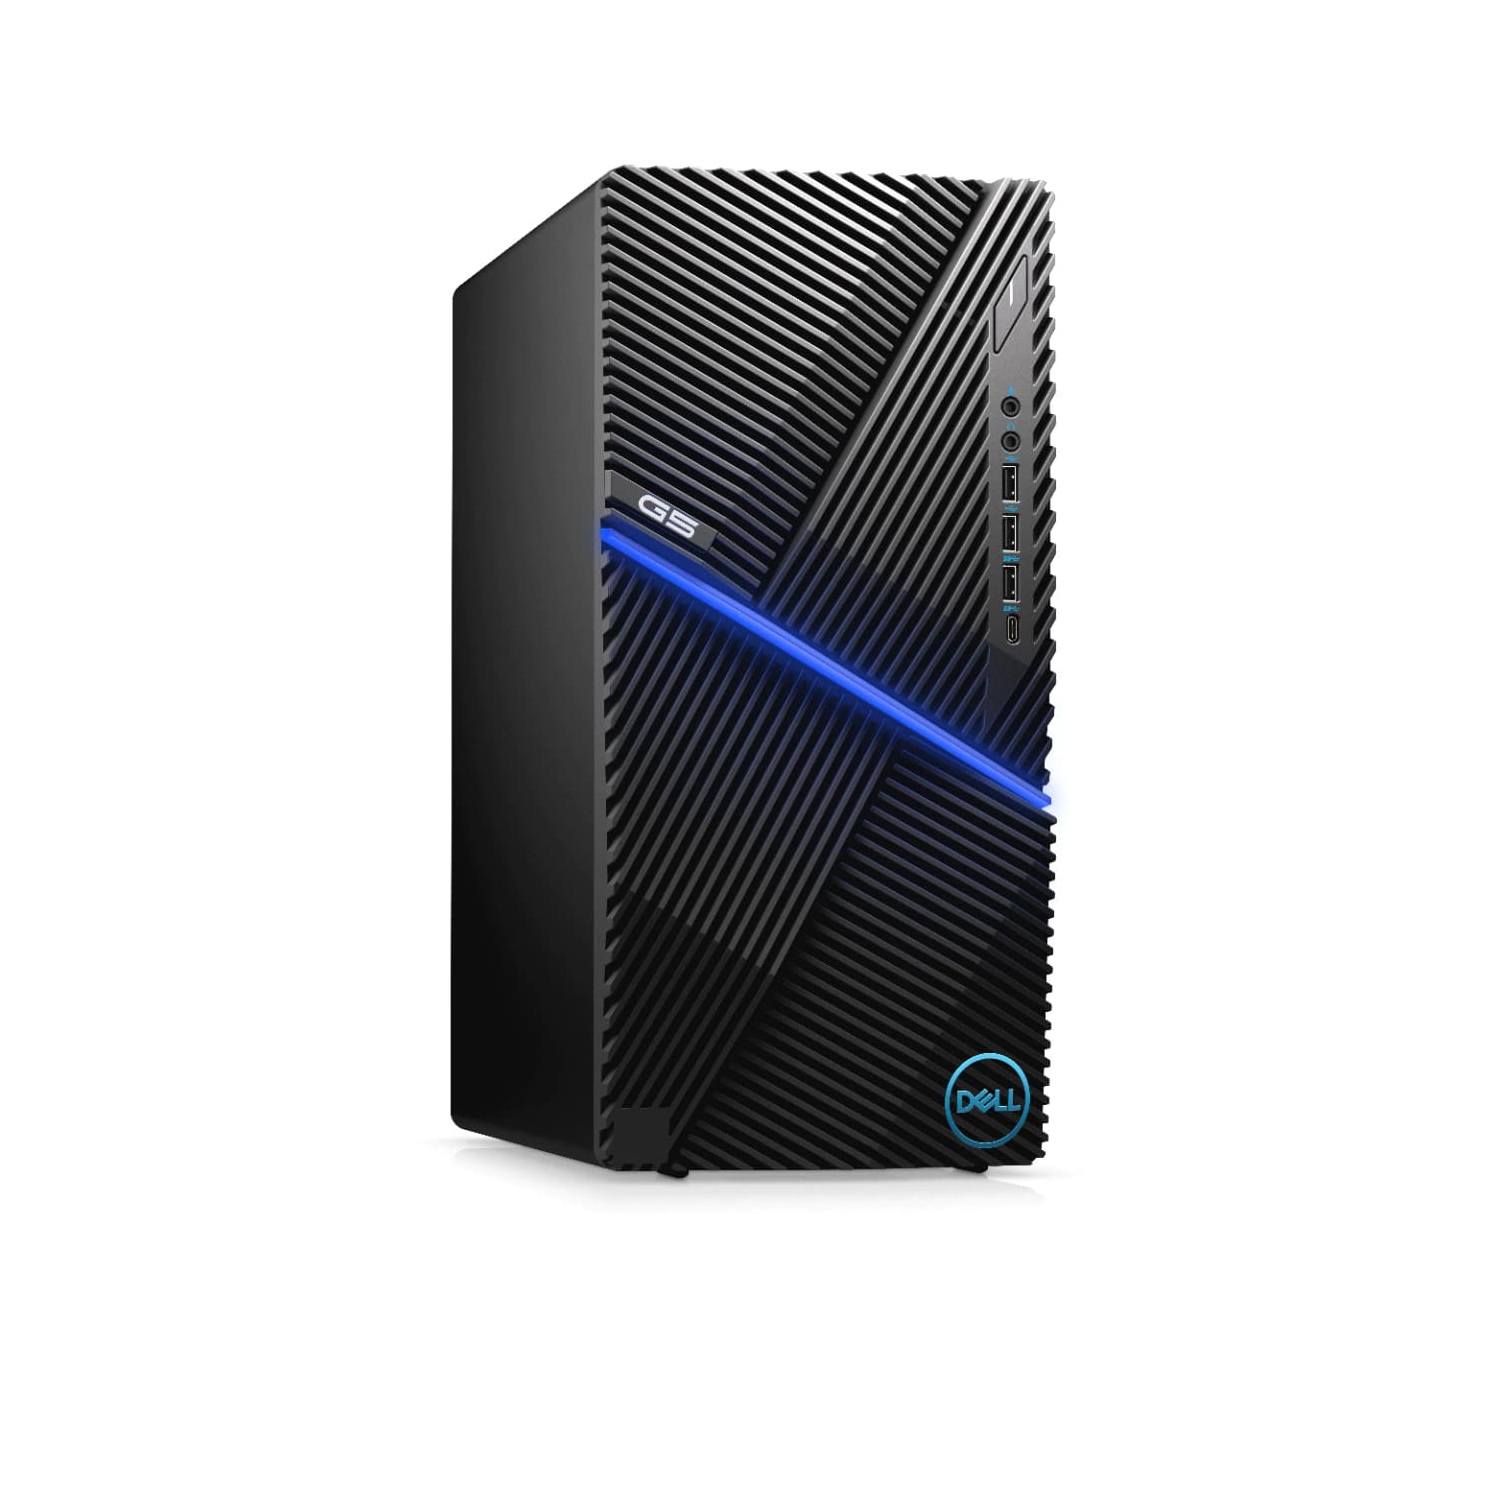 Refurbished (Excellent) - Dell G5 5000 Gaming Desktop (2020) | Core i7 - 1TB SSD - 16GB RAM - RTX 3060 | 8 Cores @ 4.8 GHz - 10th Gen CPU Certified Refurbished